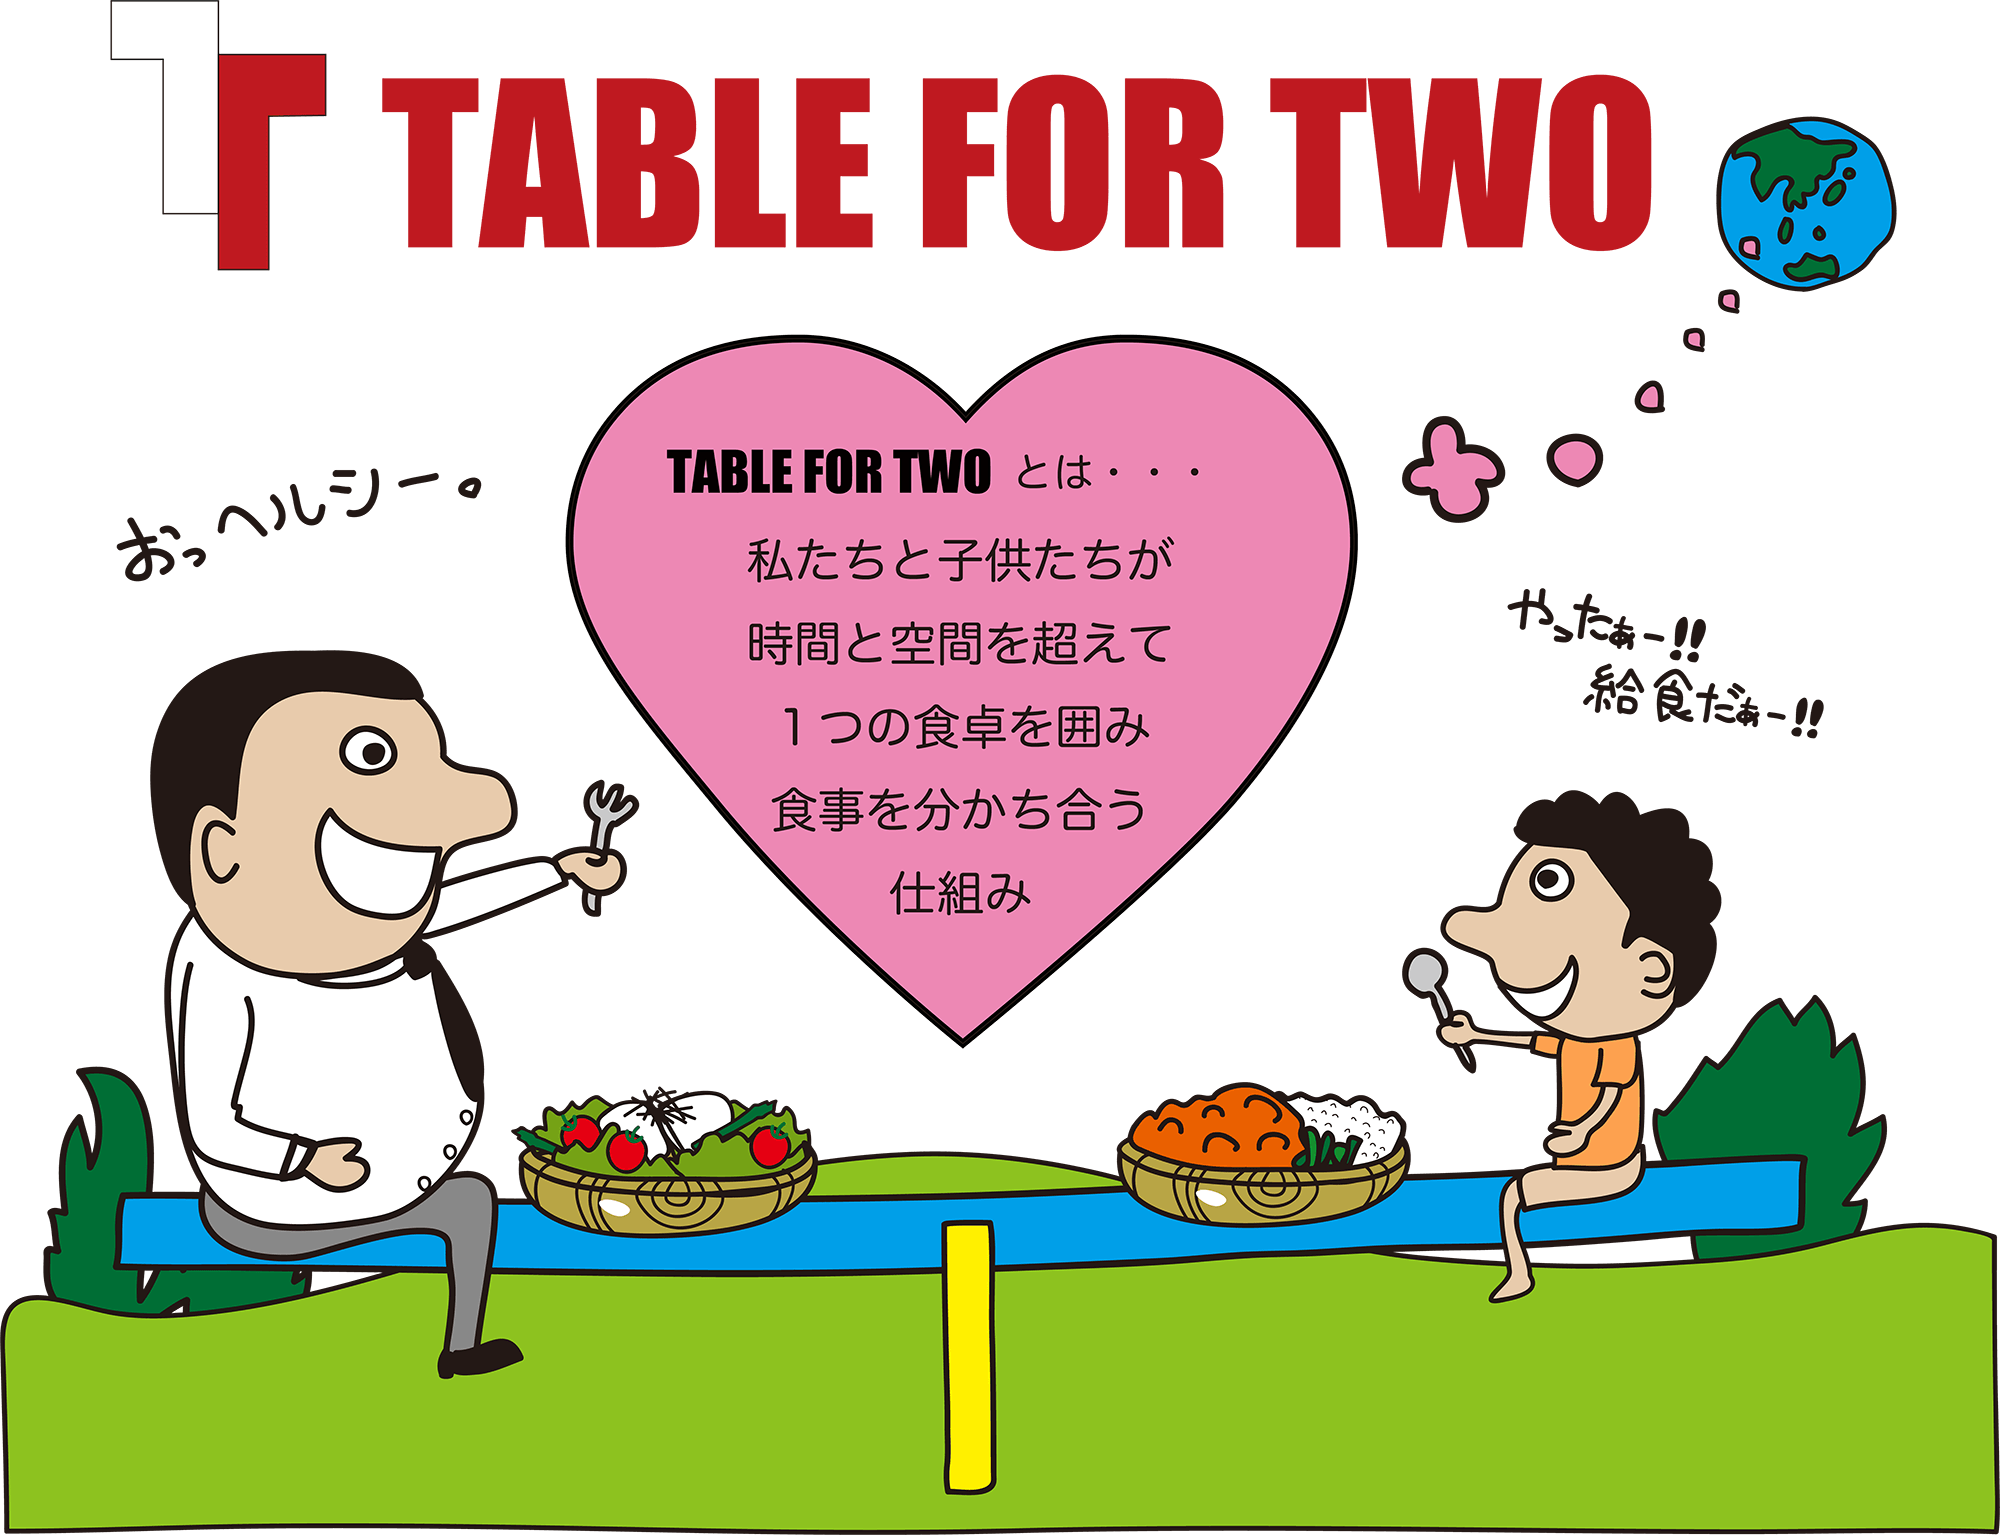 Table for two のイラスト